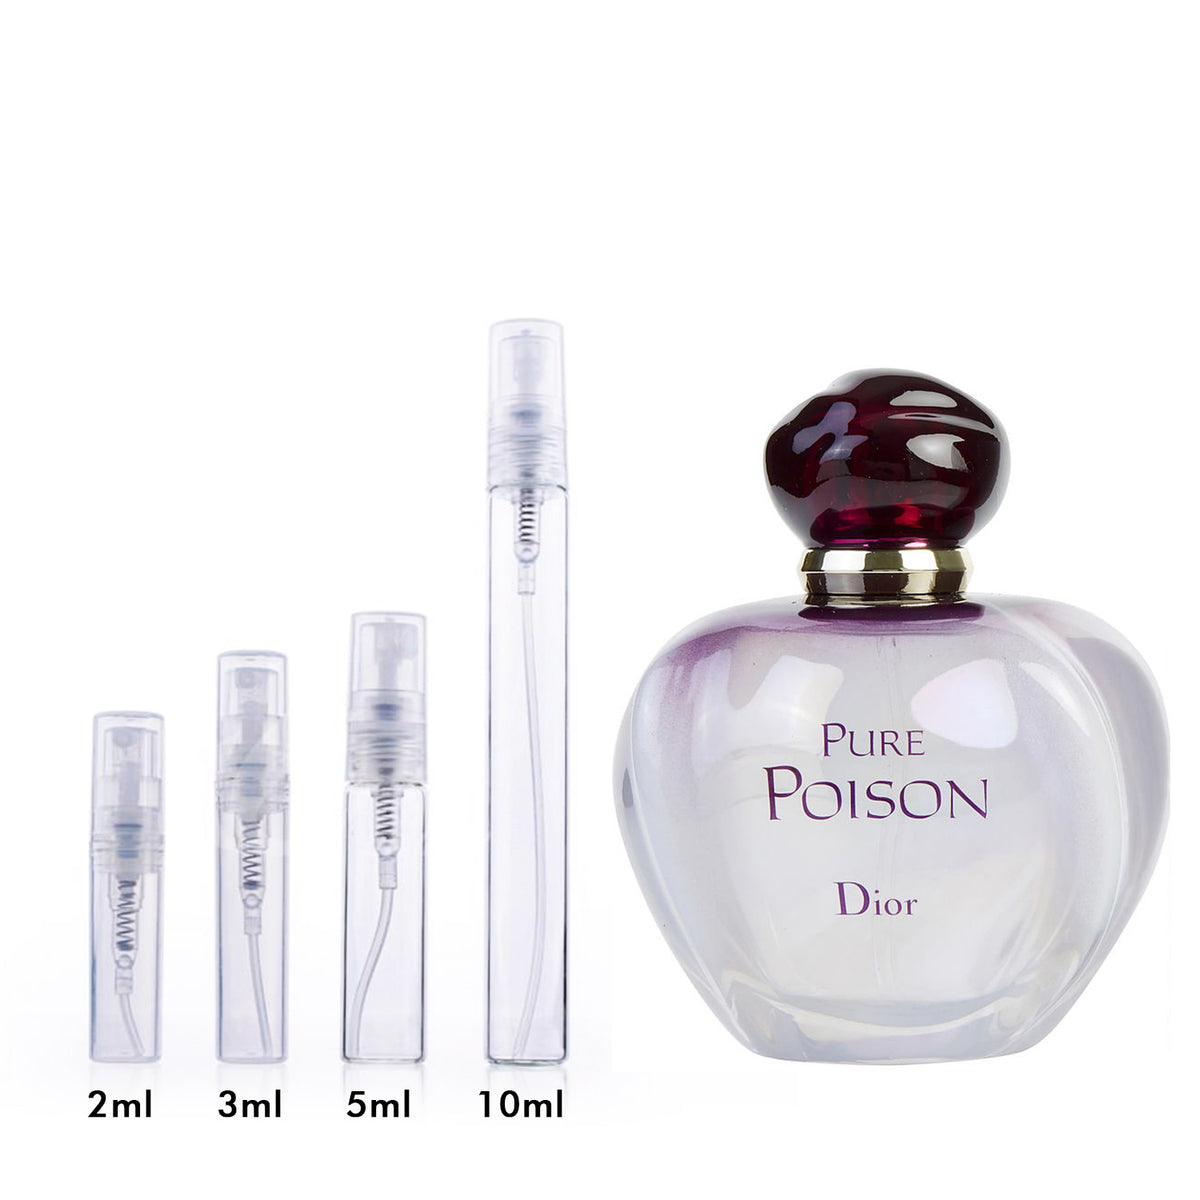 Christian Dior Pure Poison samples –